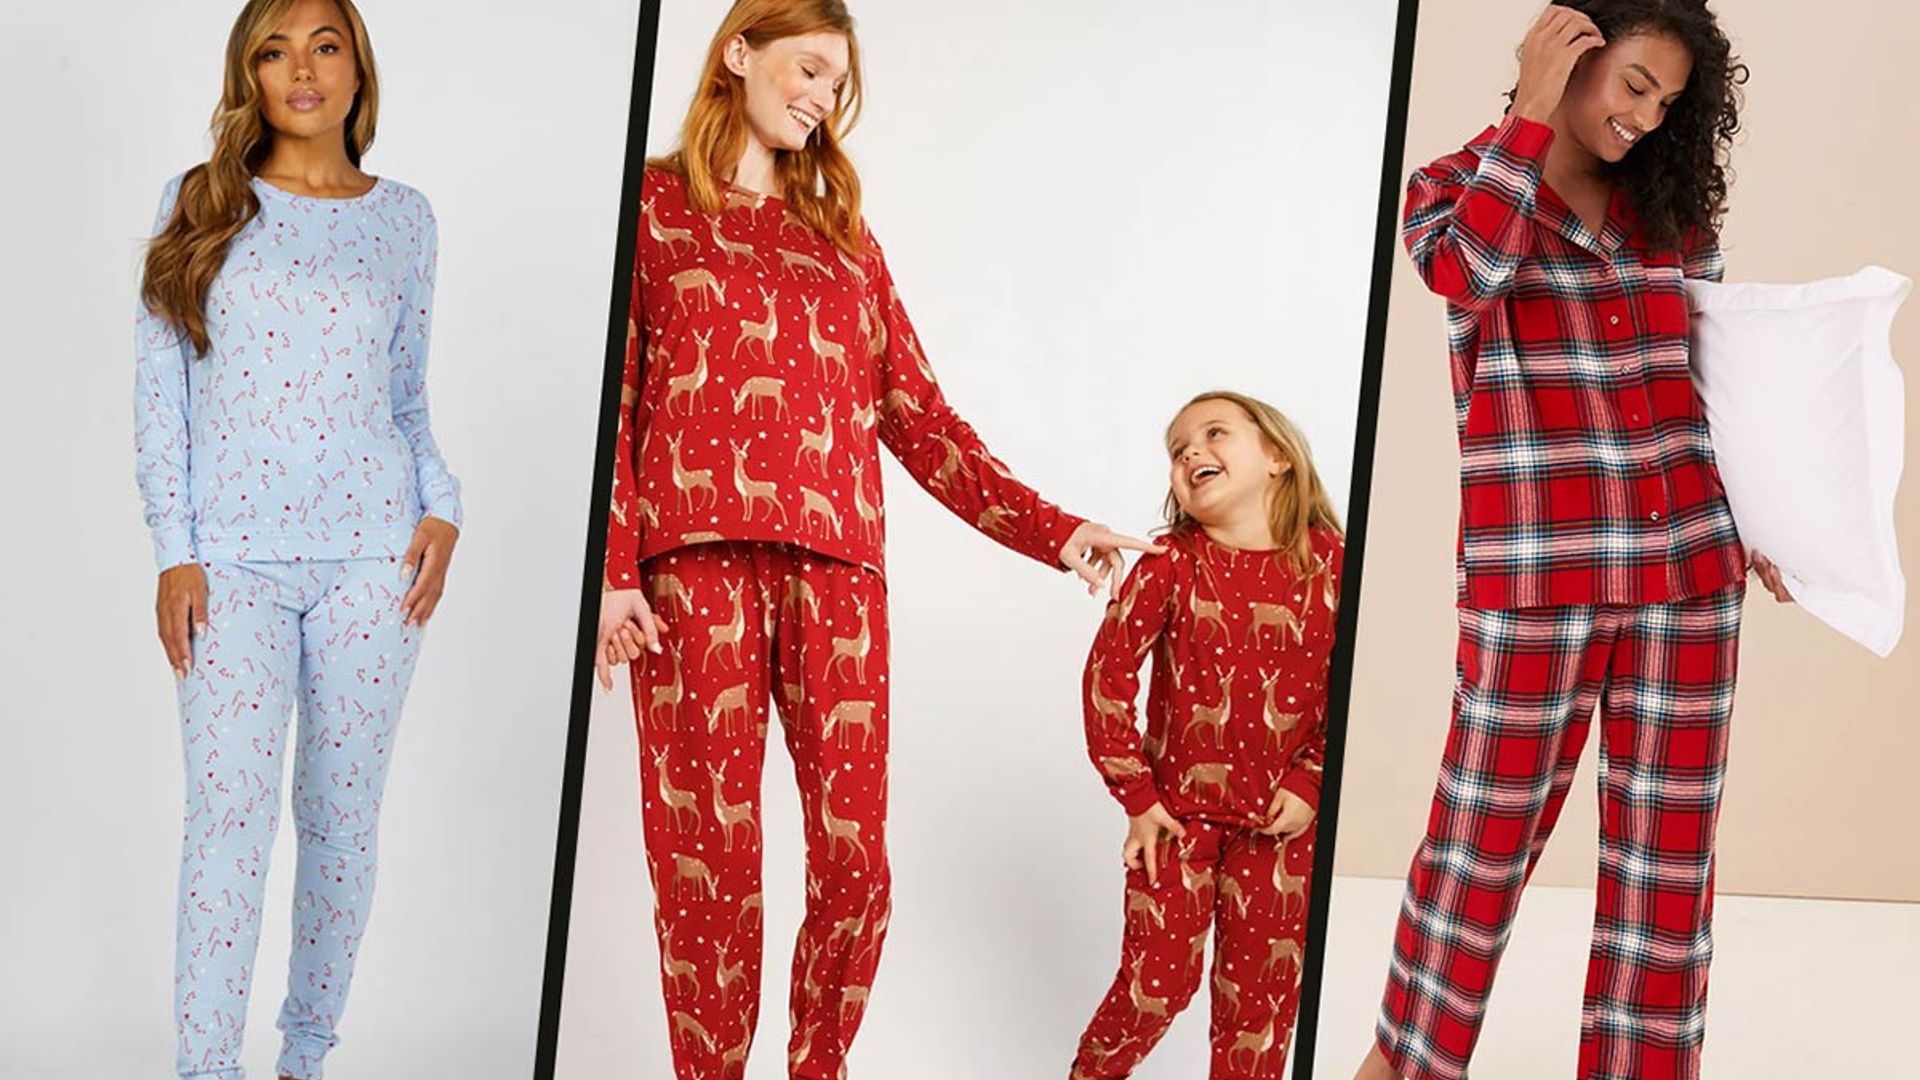 11 best Christmas pyjamas for the family 2022: Matching sets from M&S to